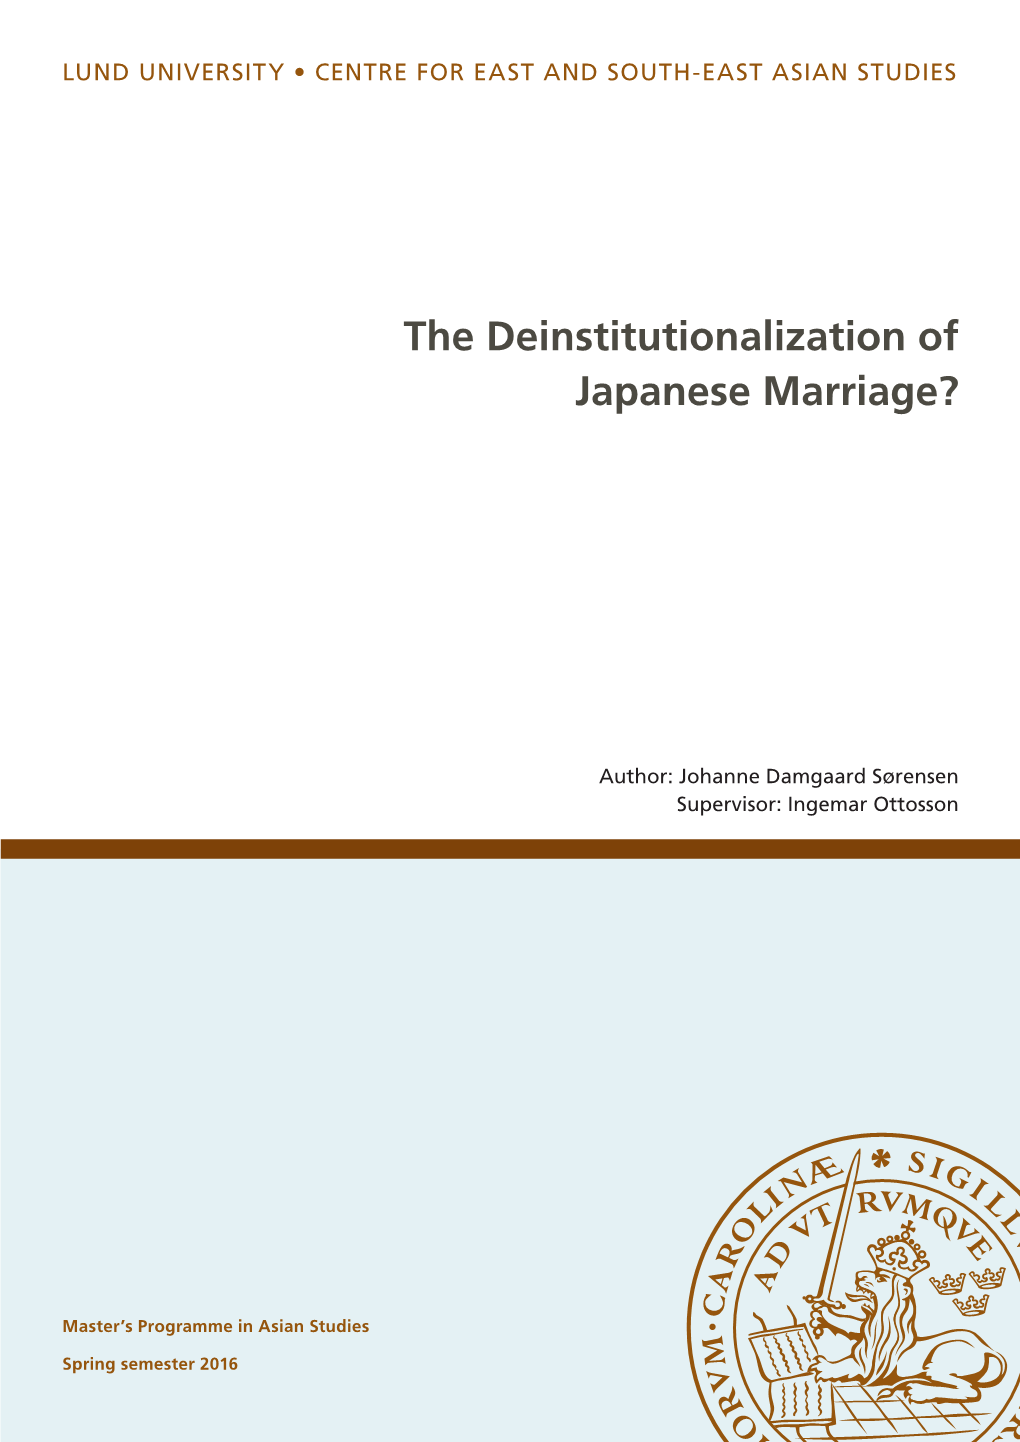 The Deinstitutionalization of Japanese Marriage?